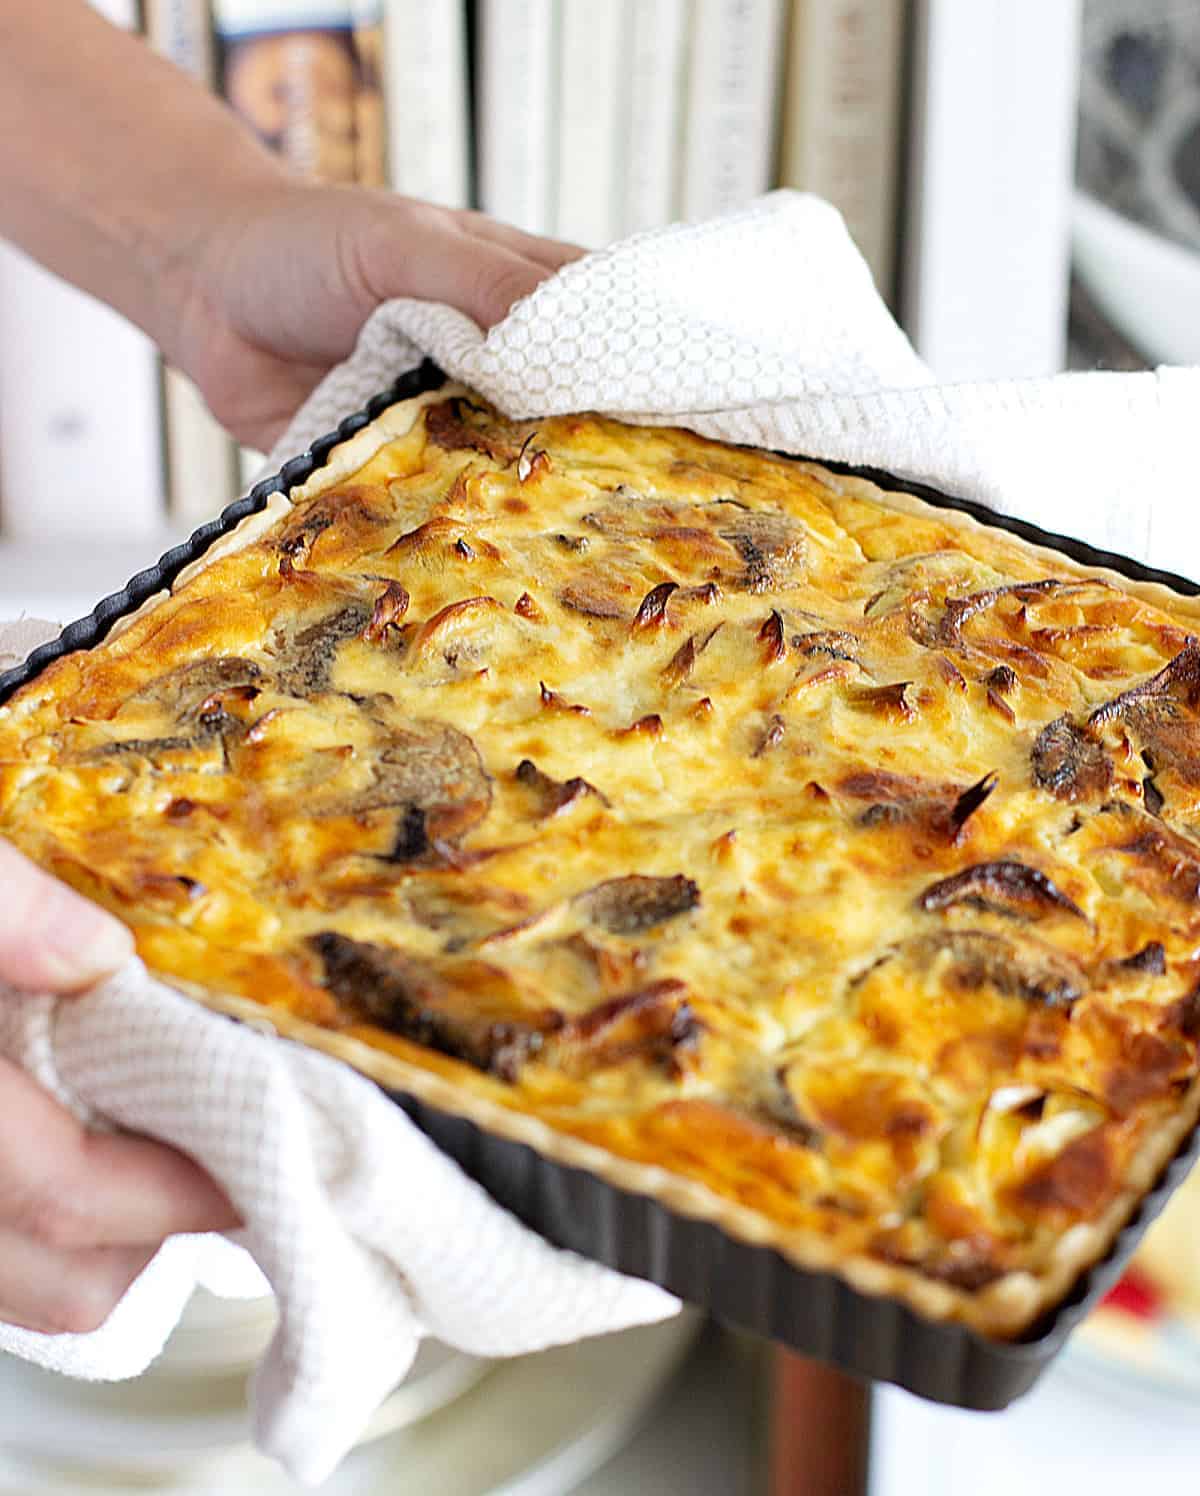 Hands holding square mushroom quiche still in metal pan